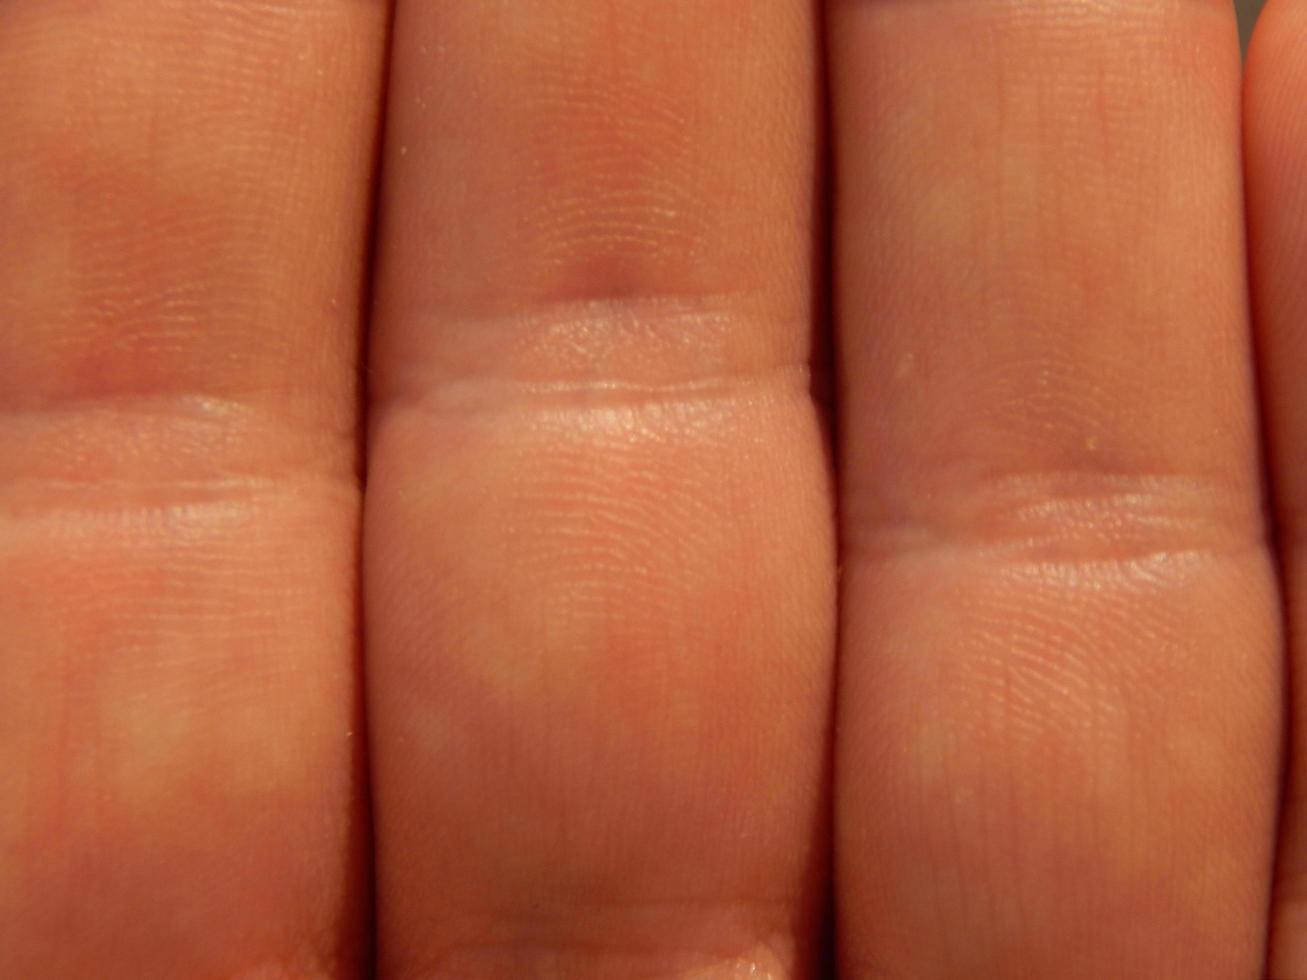 Human skin texture in various parts of the body photo